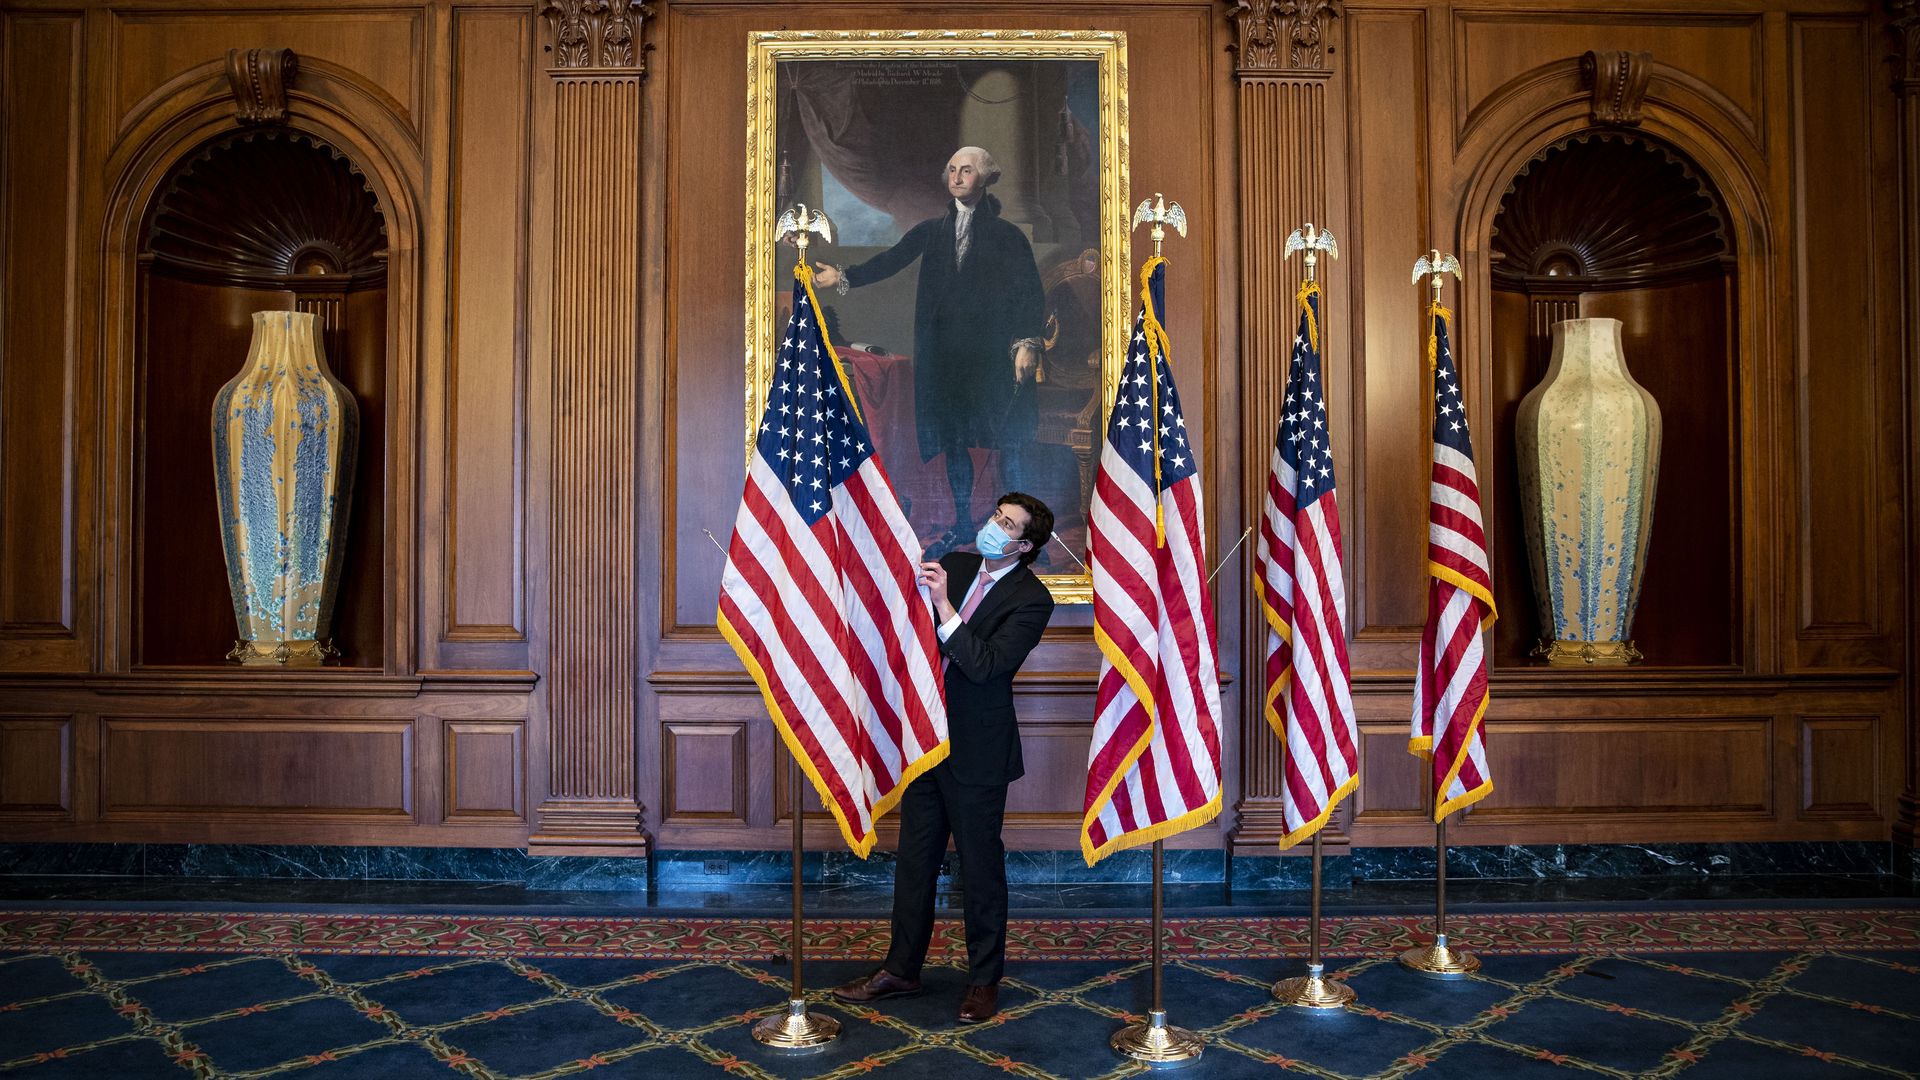 A congressional aide is seen adjusting flags before a swearing-in ceremony.